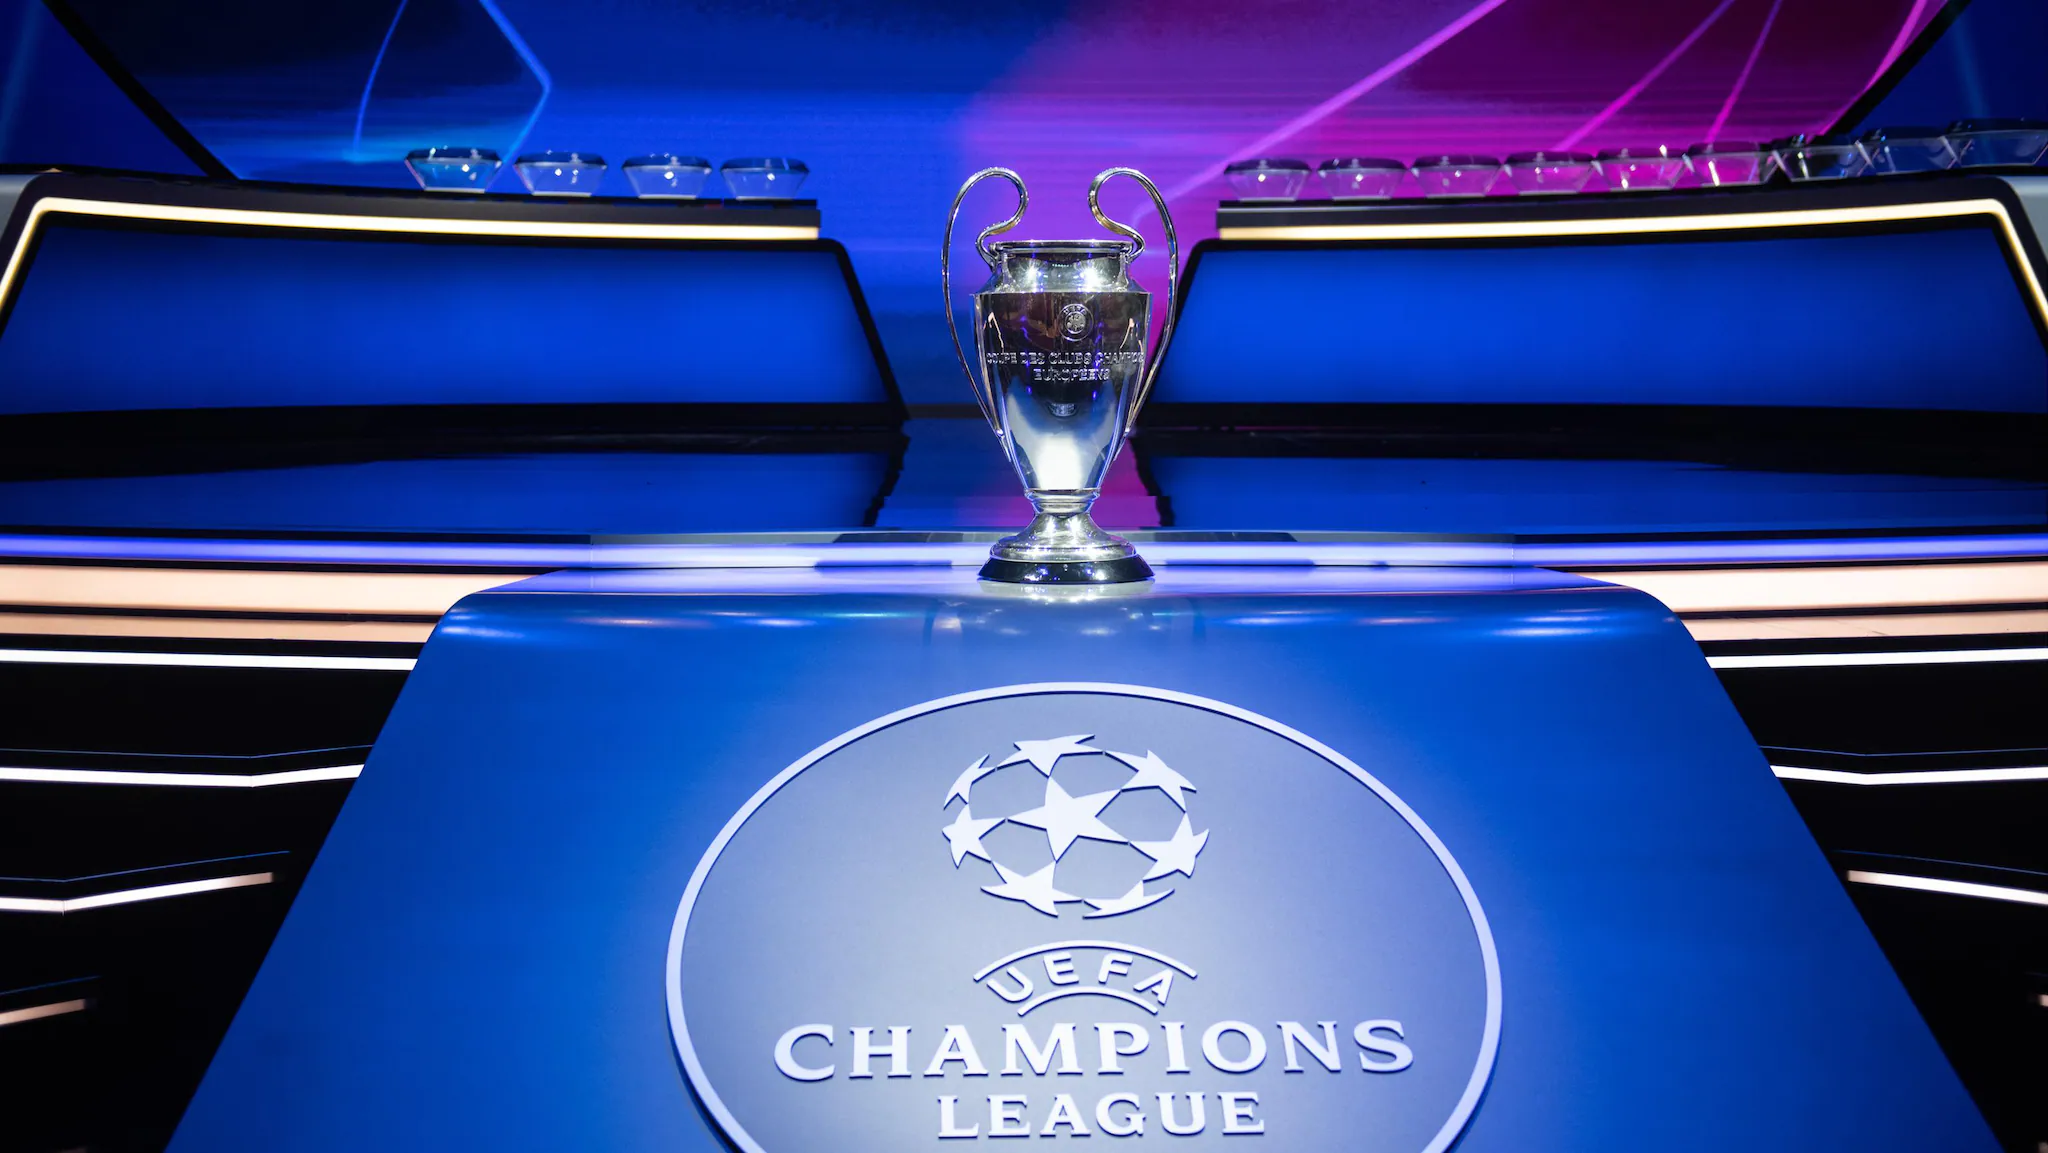 2022/23 UEFA Champions League Group Stage Draw - [Complete Draws]